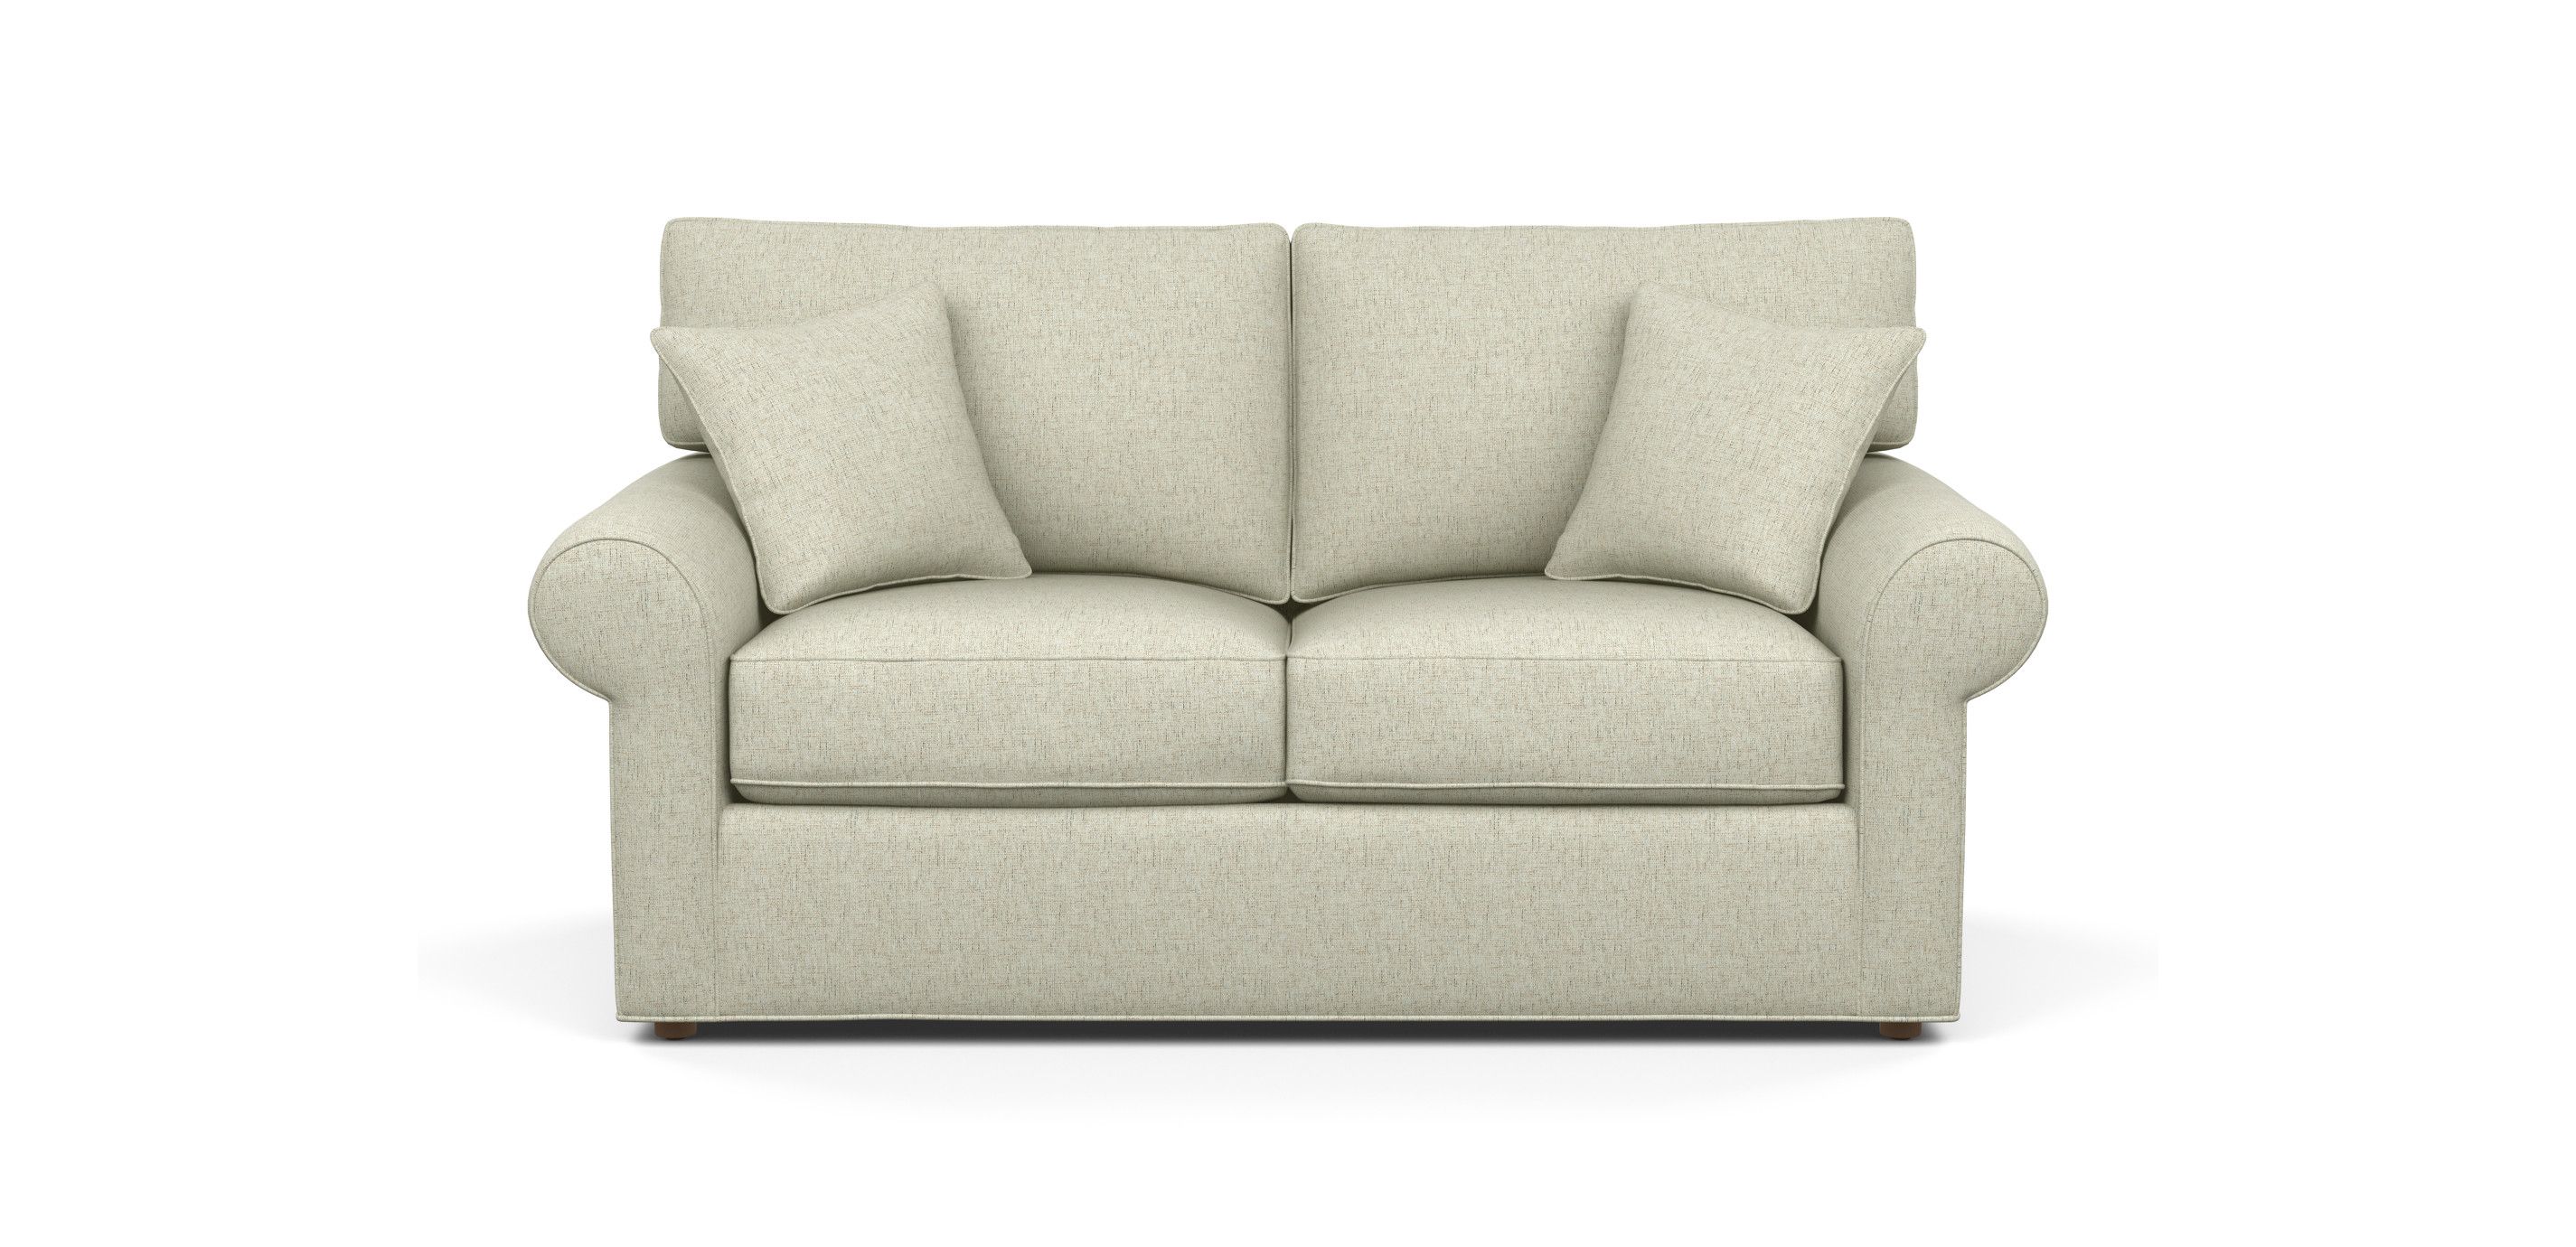 Retreat Roll Arm Sofa | Sofas & Loveseats | Ethan Allen With Regard To Sofas With Rolled Arm (View 11 of 15)